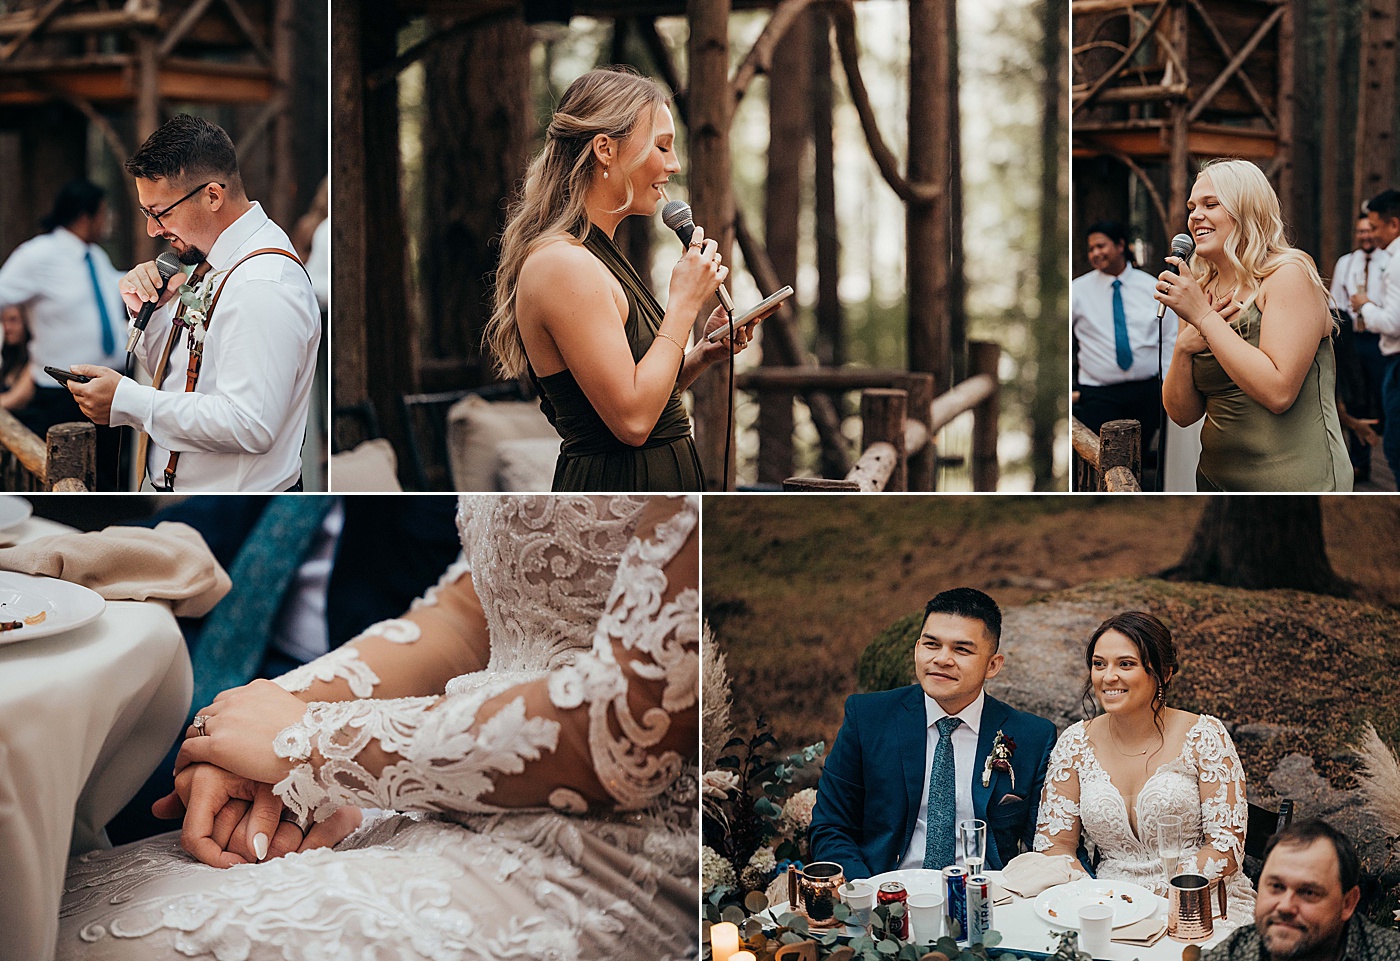 Toasts during reception at Emerald Forest Treehouse | Photo by Megan Montalvo Photography